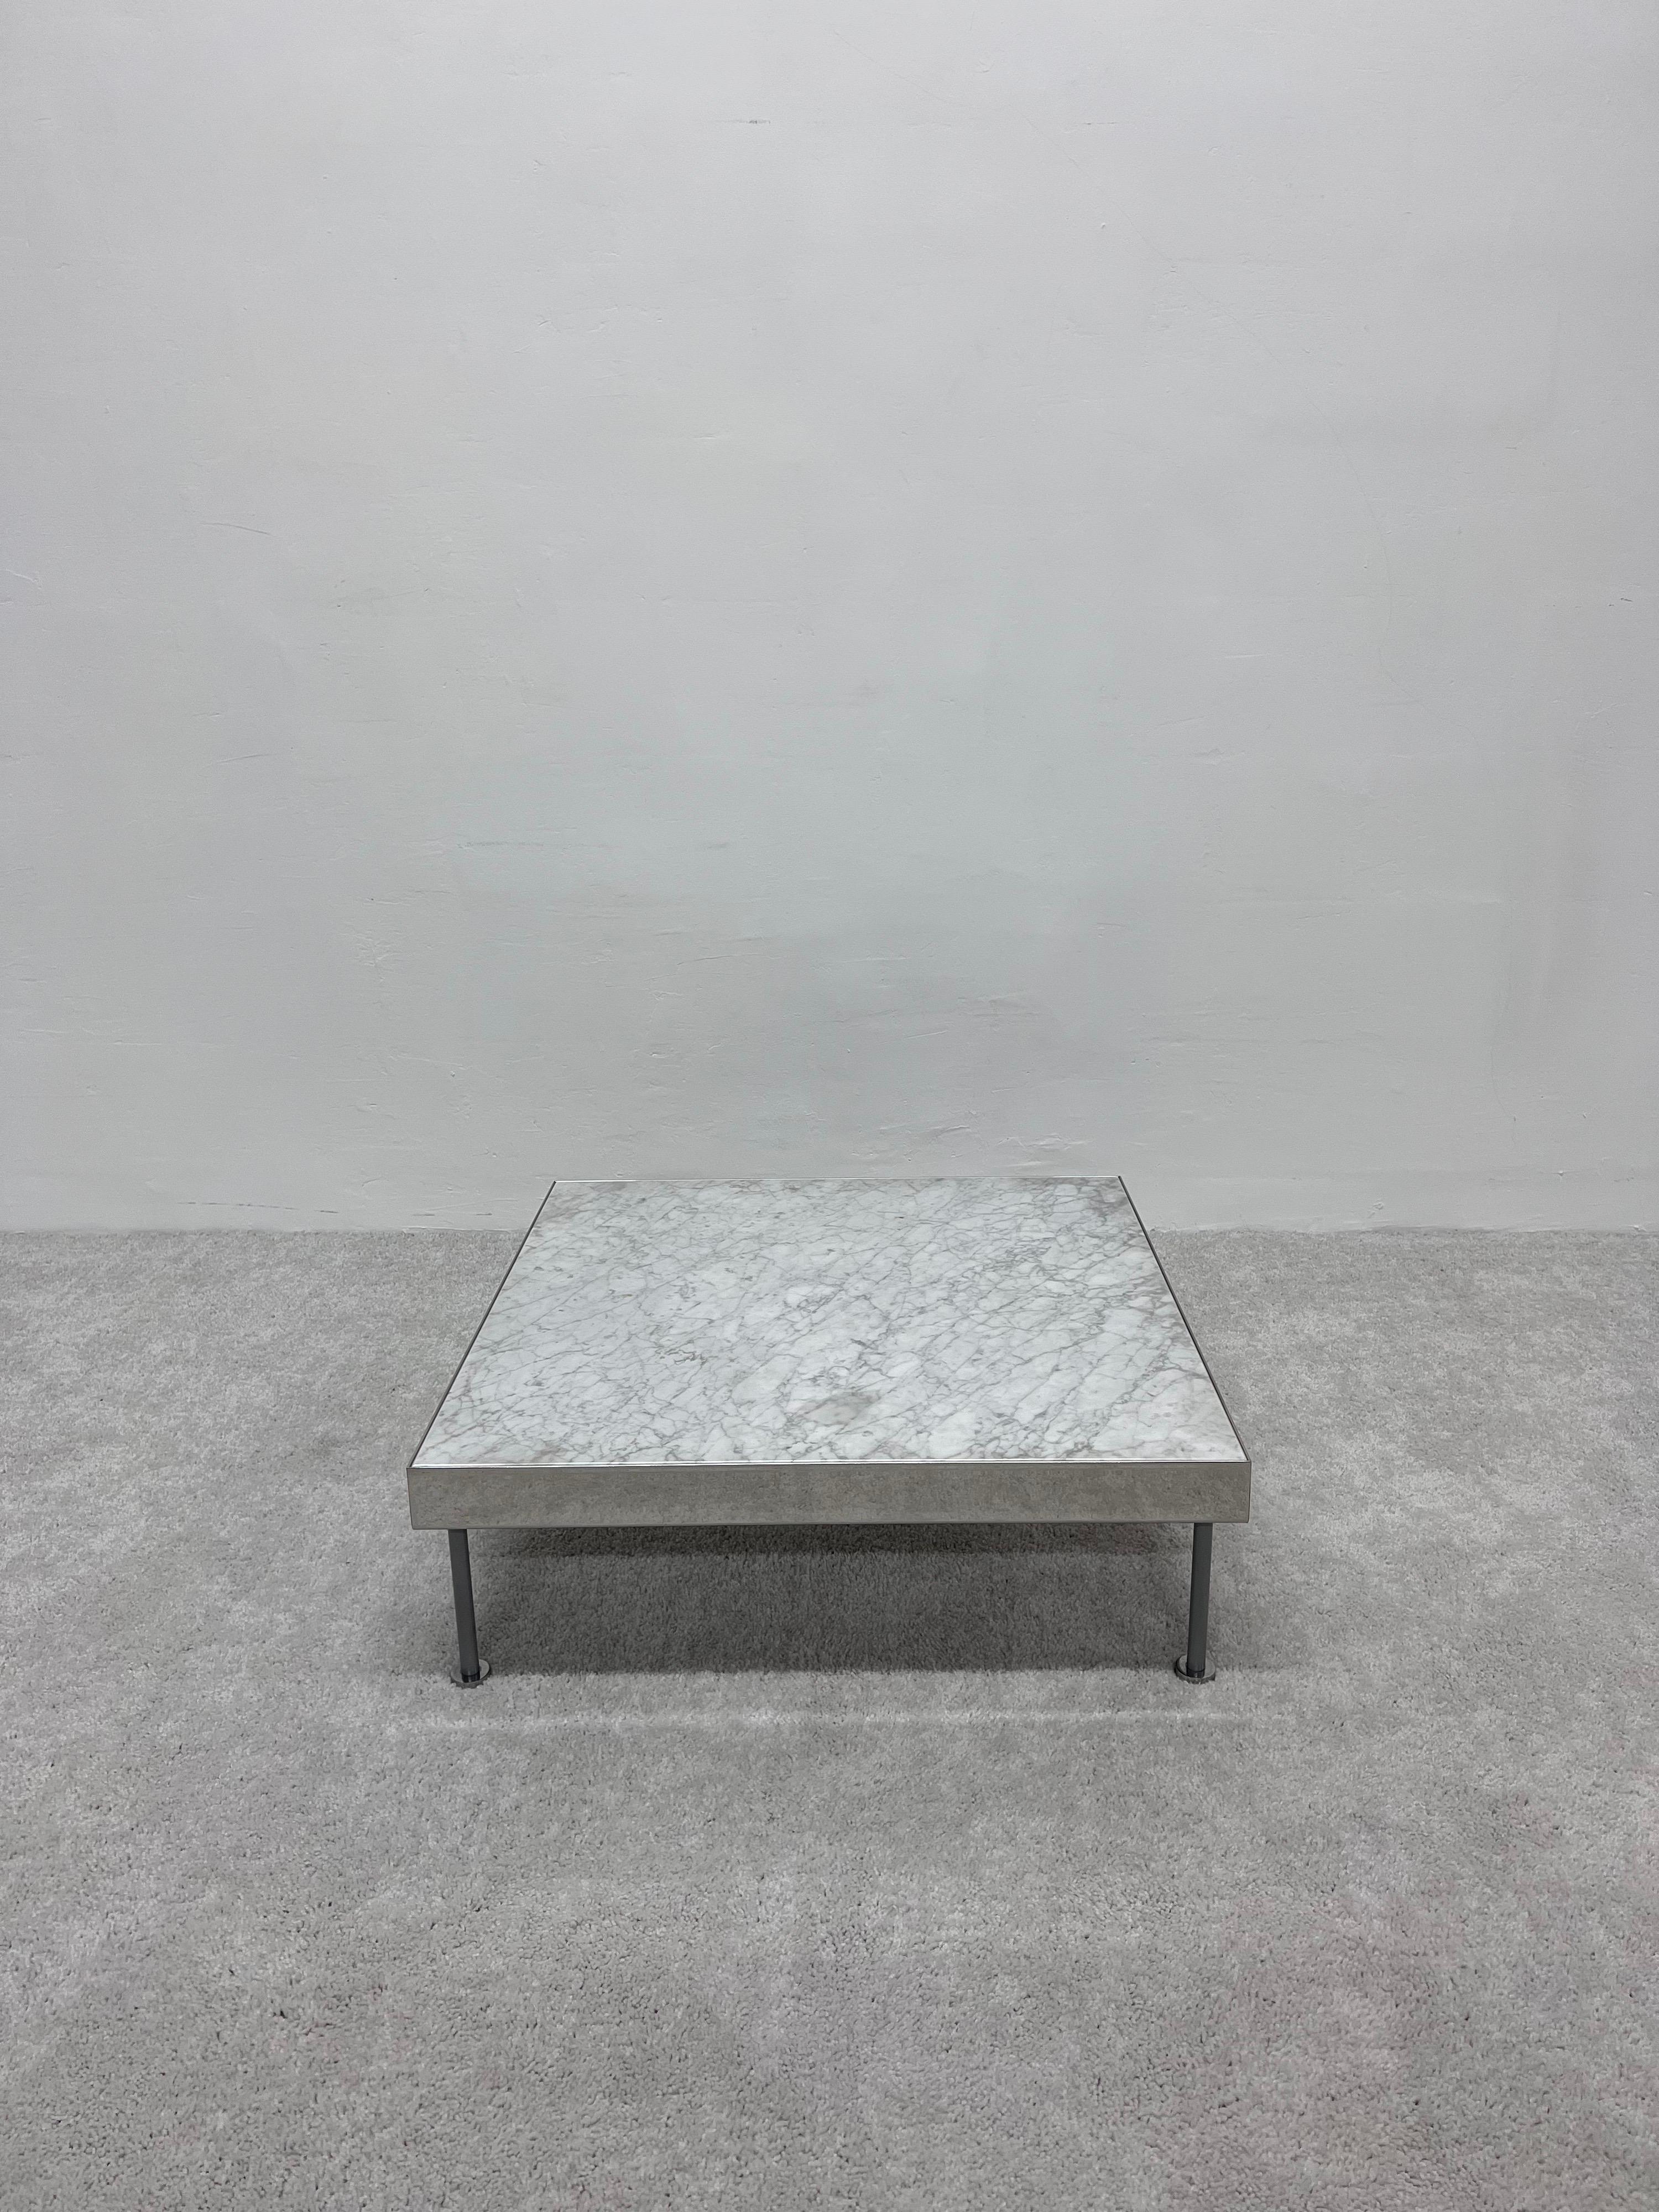 Contemporary Carrara Marble and Polished Steel Low Coffee Table, 1980s For Sale 7